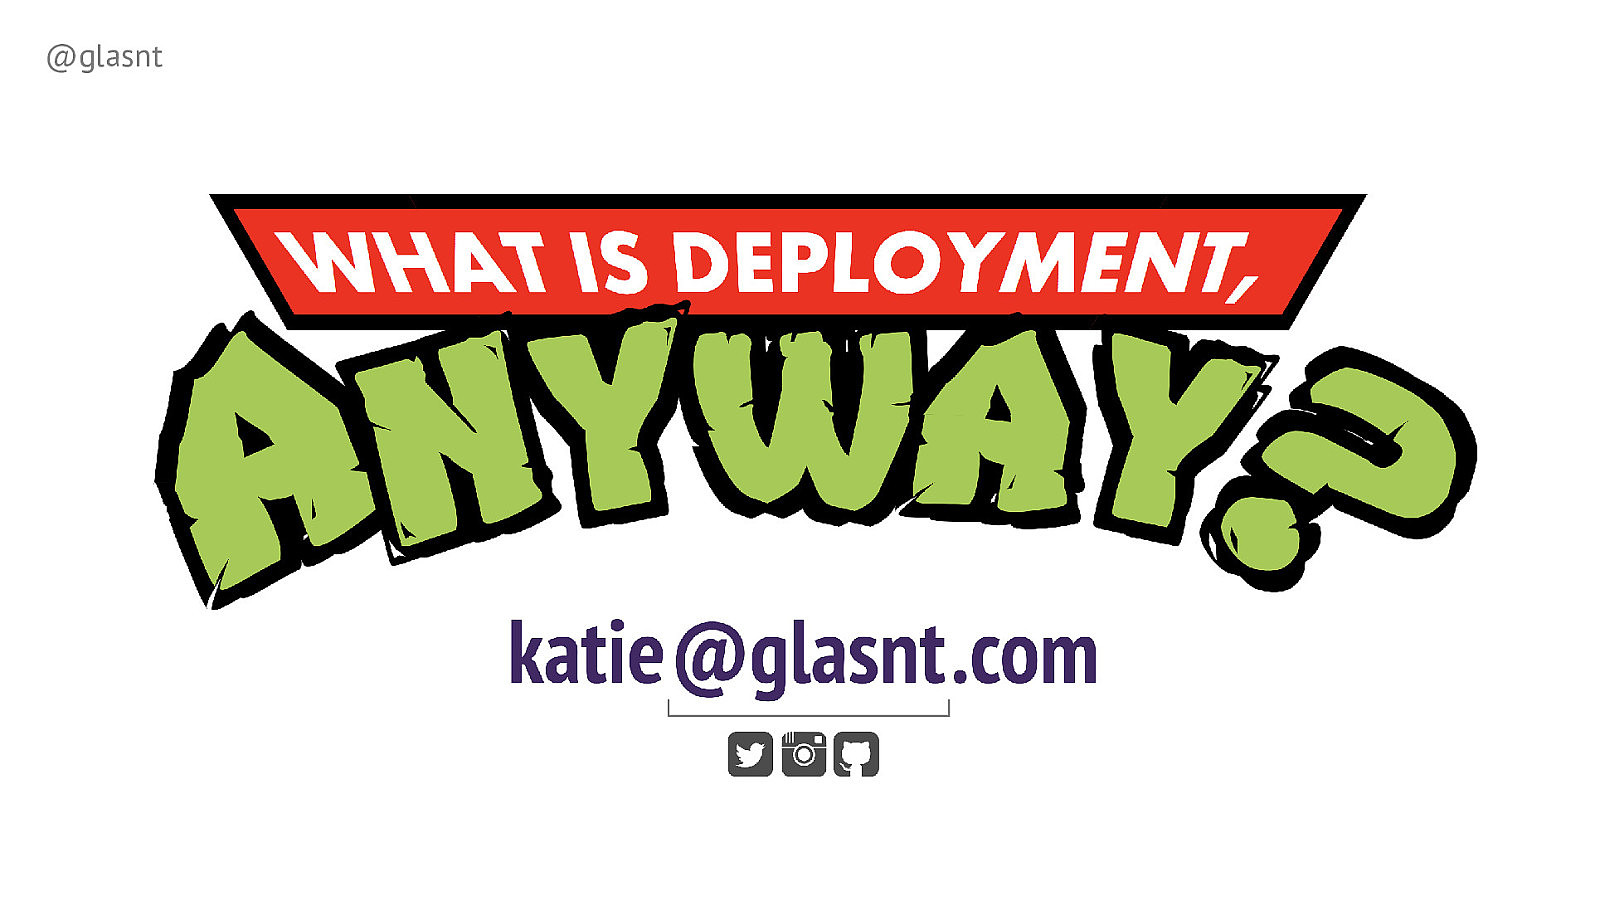 What is deployment, anyway?